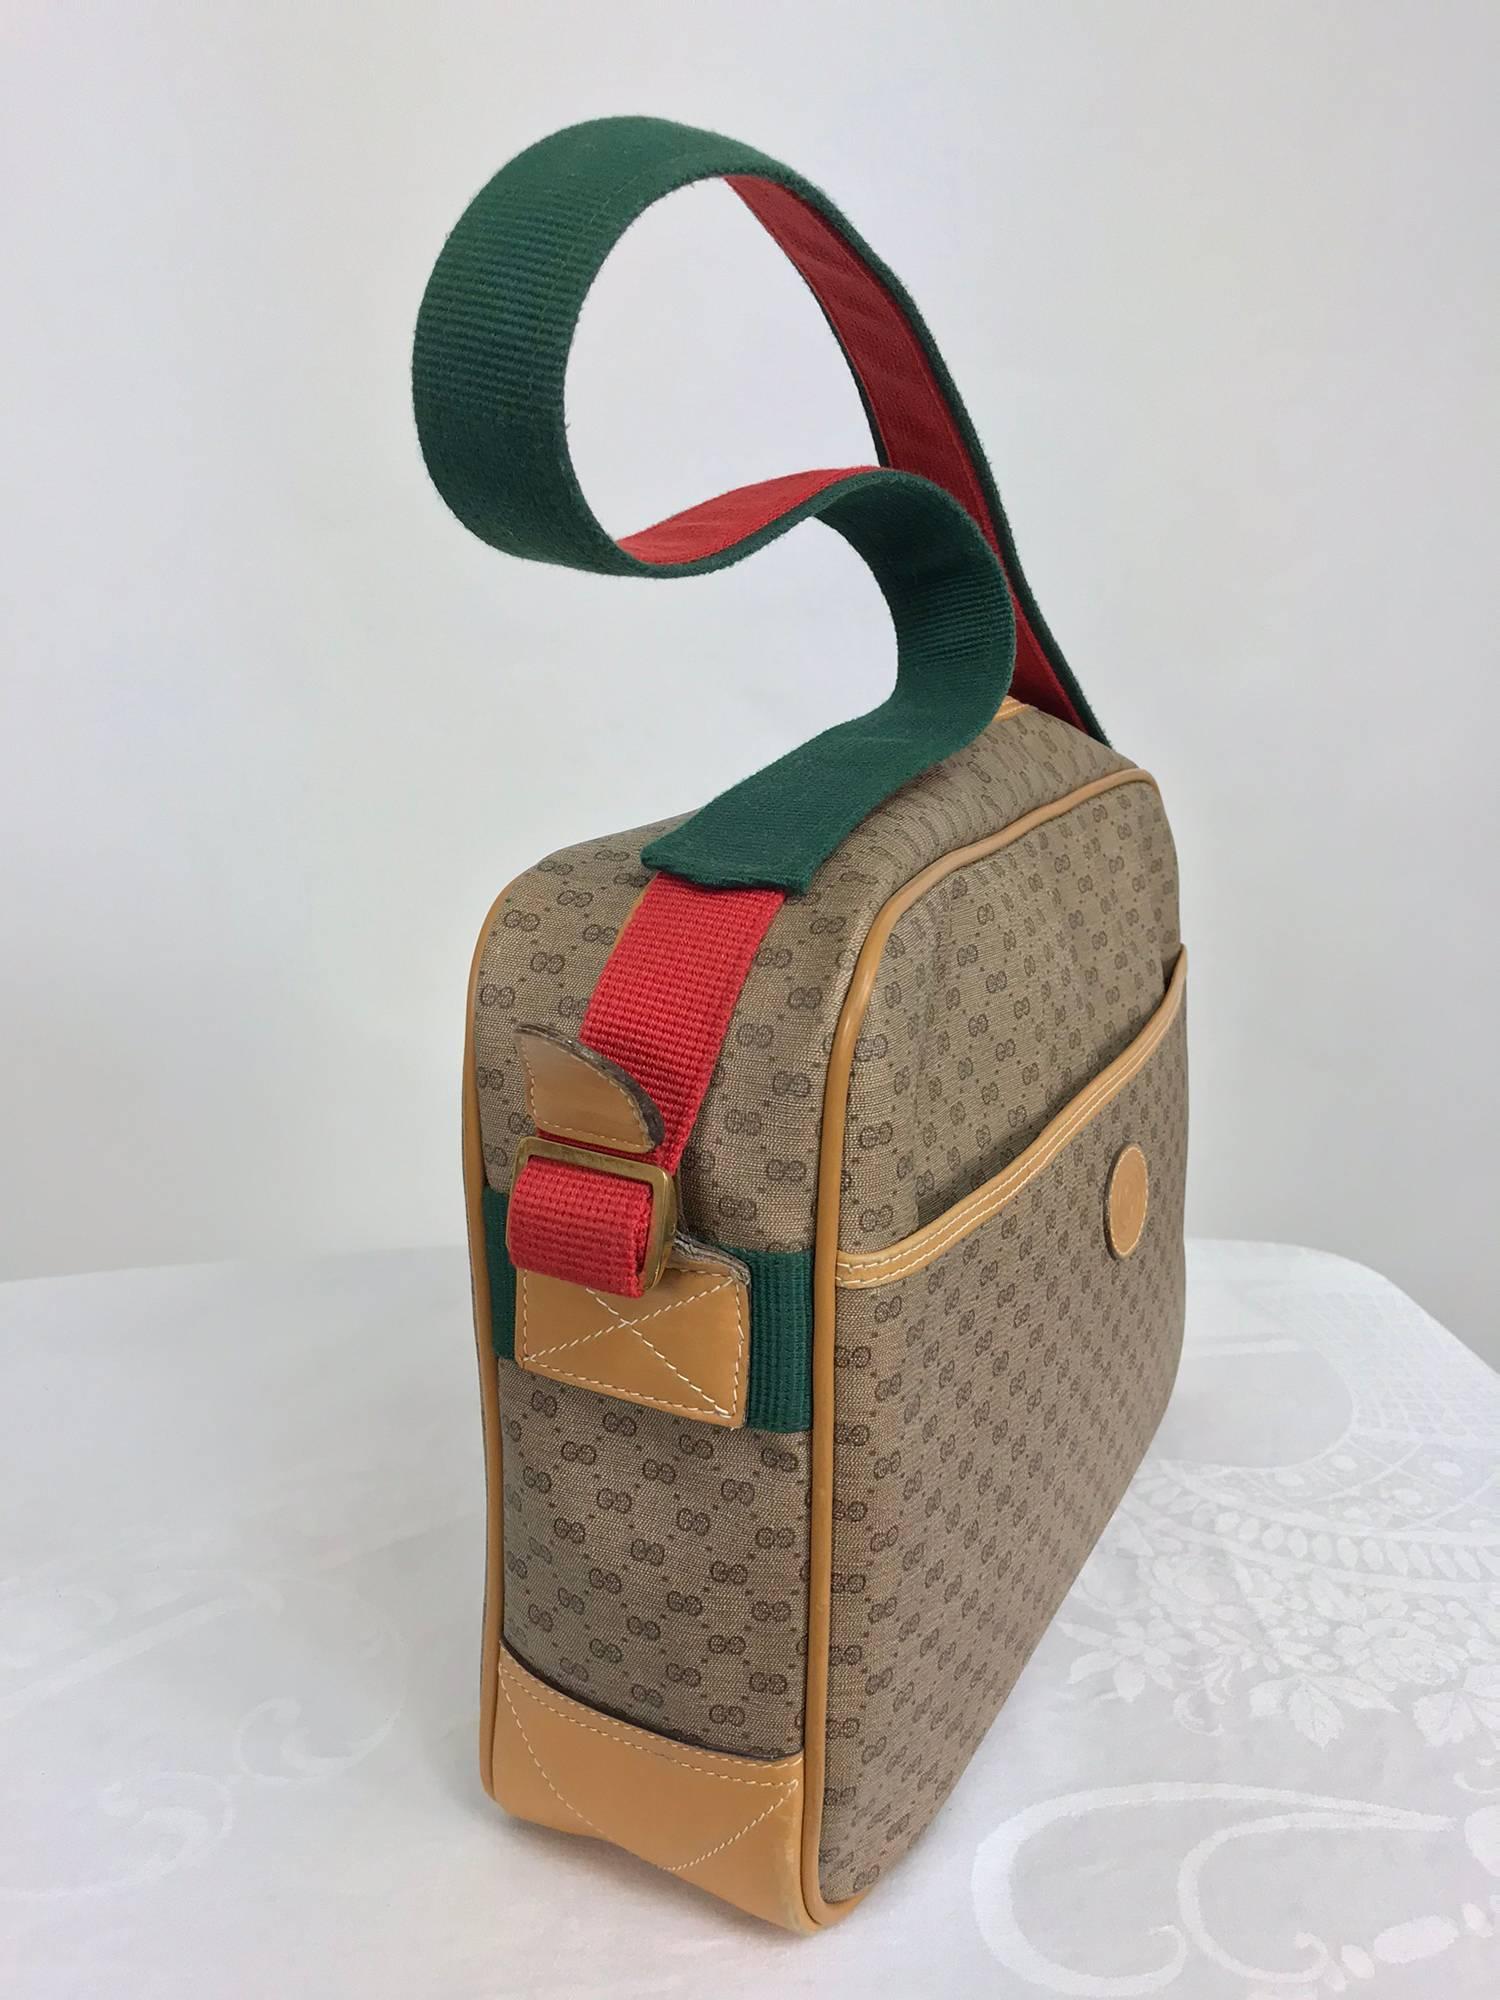 Vintage Gucci logo coated canvas leather trim shoulder tote 1980s...Good size tote with red and green webbing shoulder strap, leather cording and trims, gold hardware...Front side compartment closes with hidden red Velcro...Inside there is a